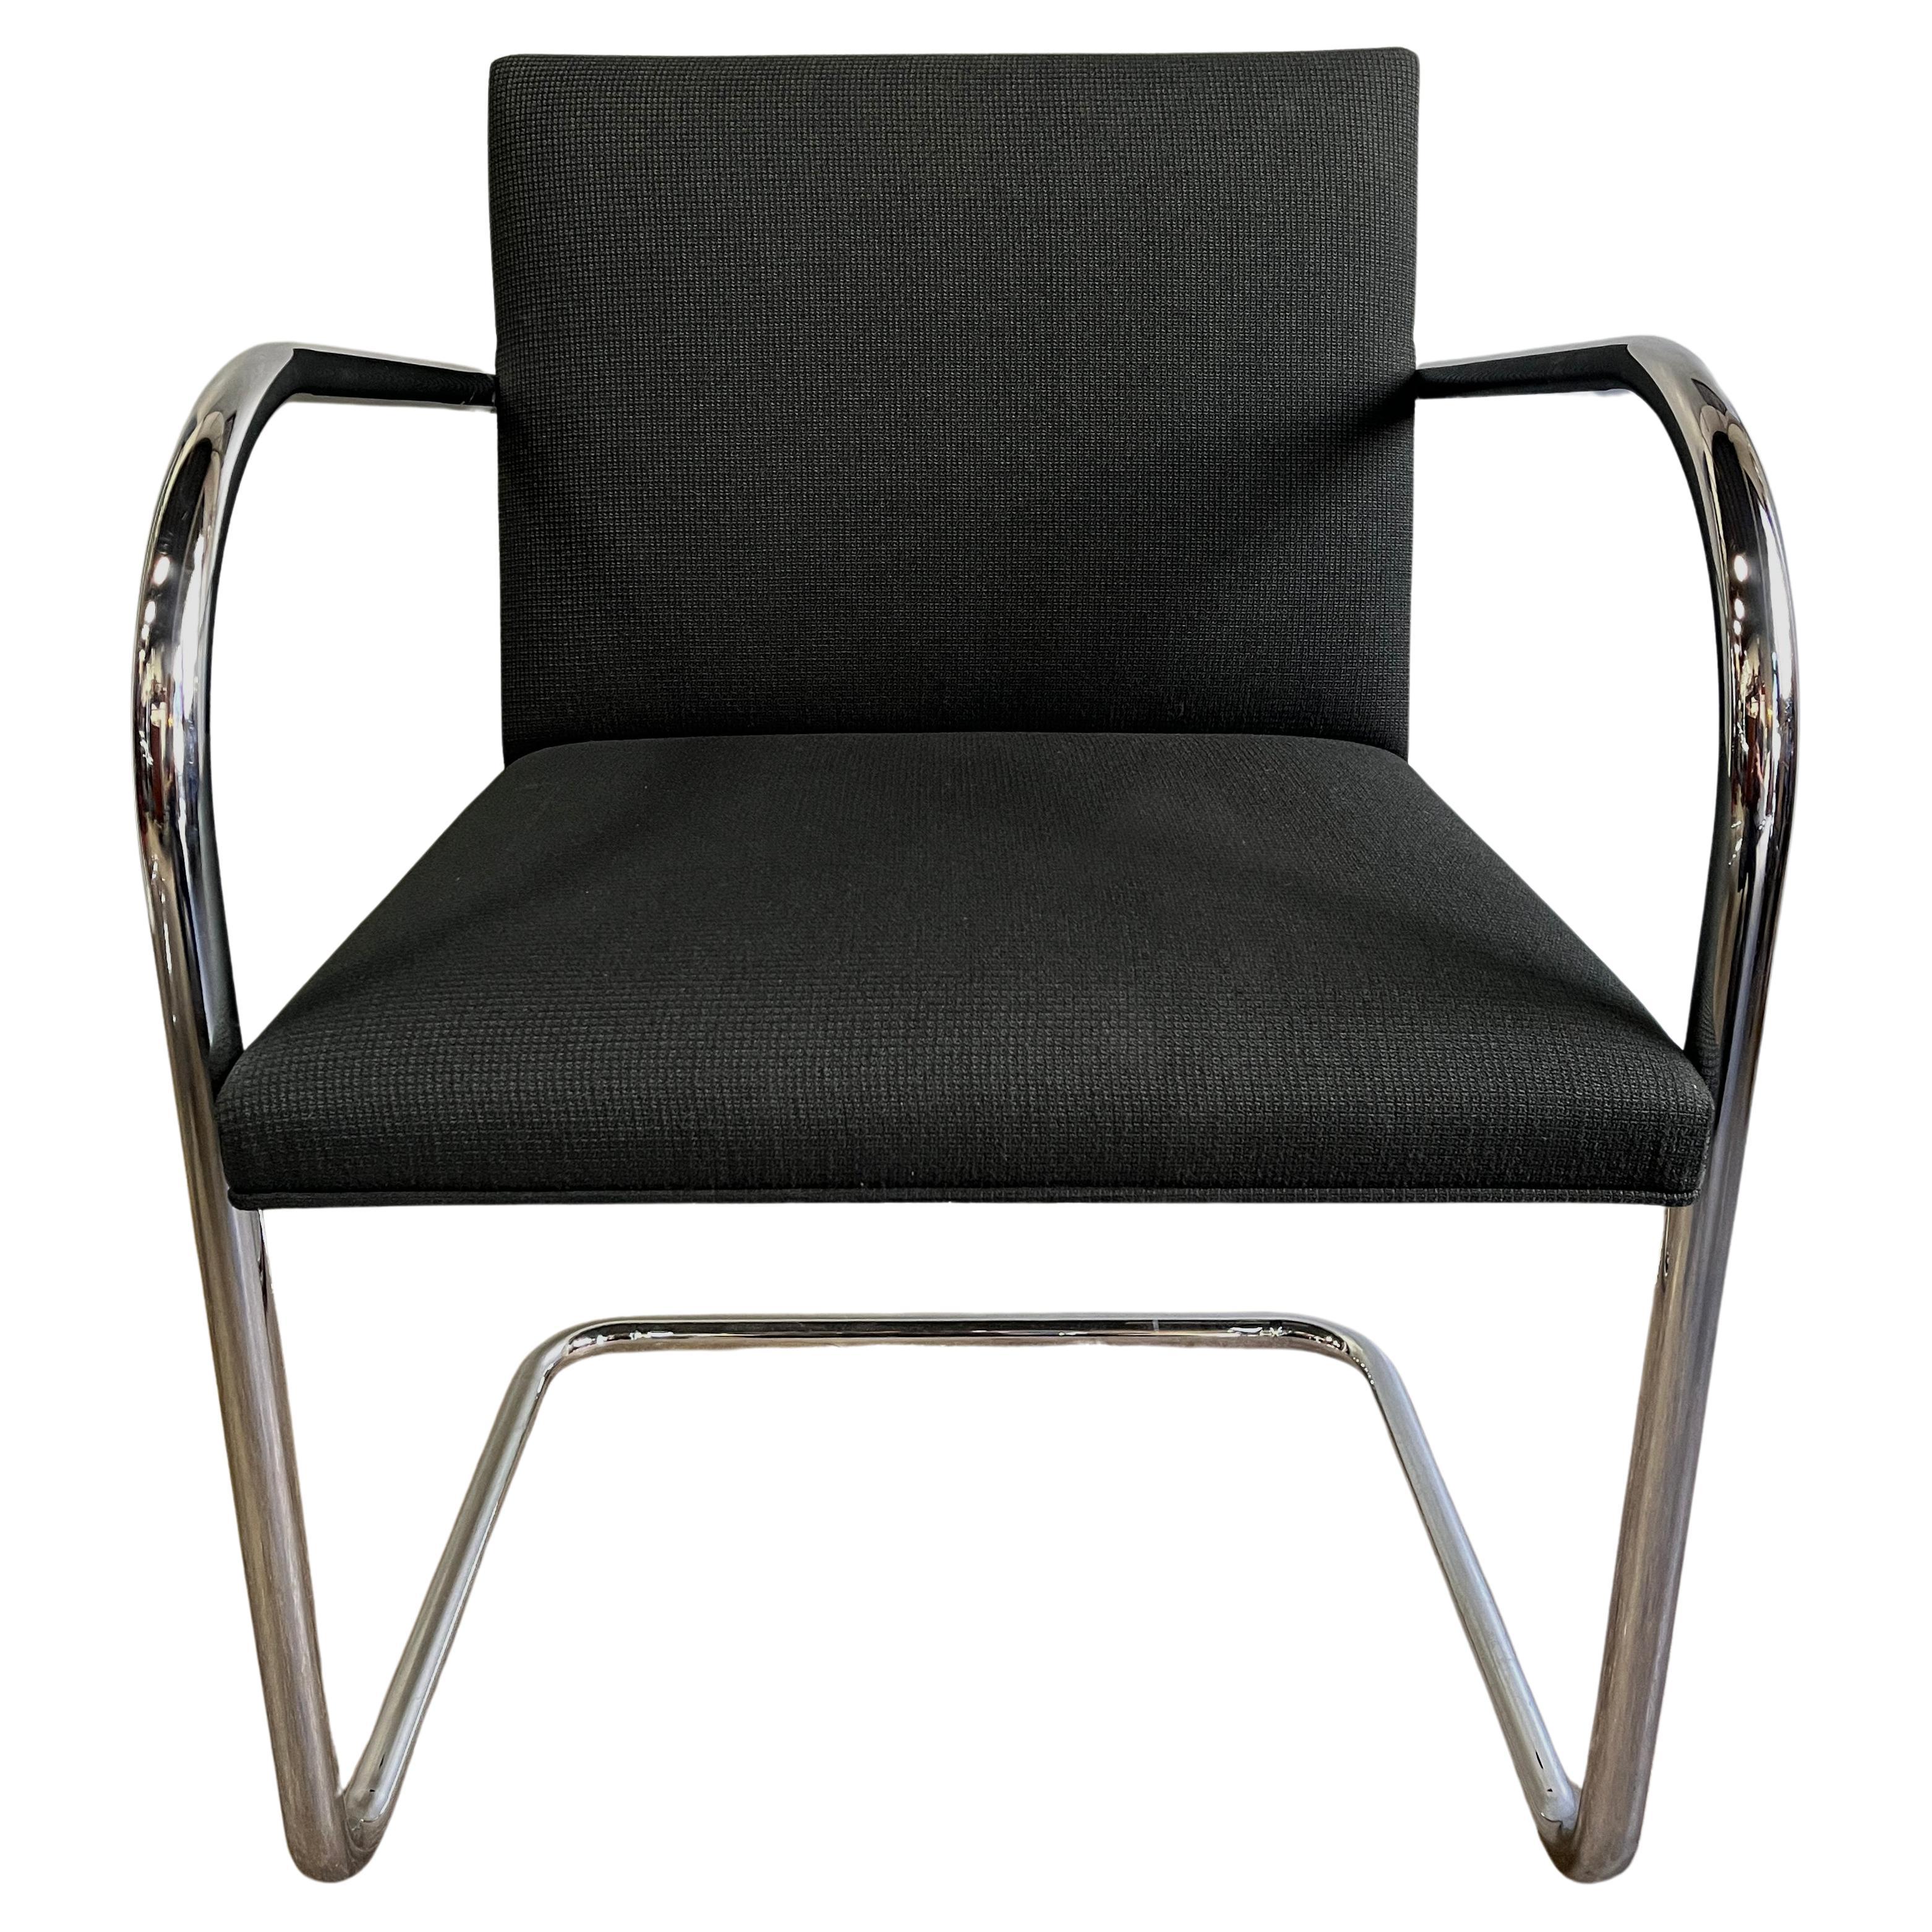 Midcentury Knoll Brno Chairs by Mies Van Der Rohe in Black 30 Available For Sale